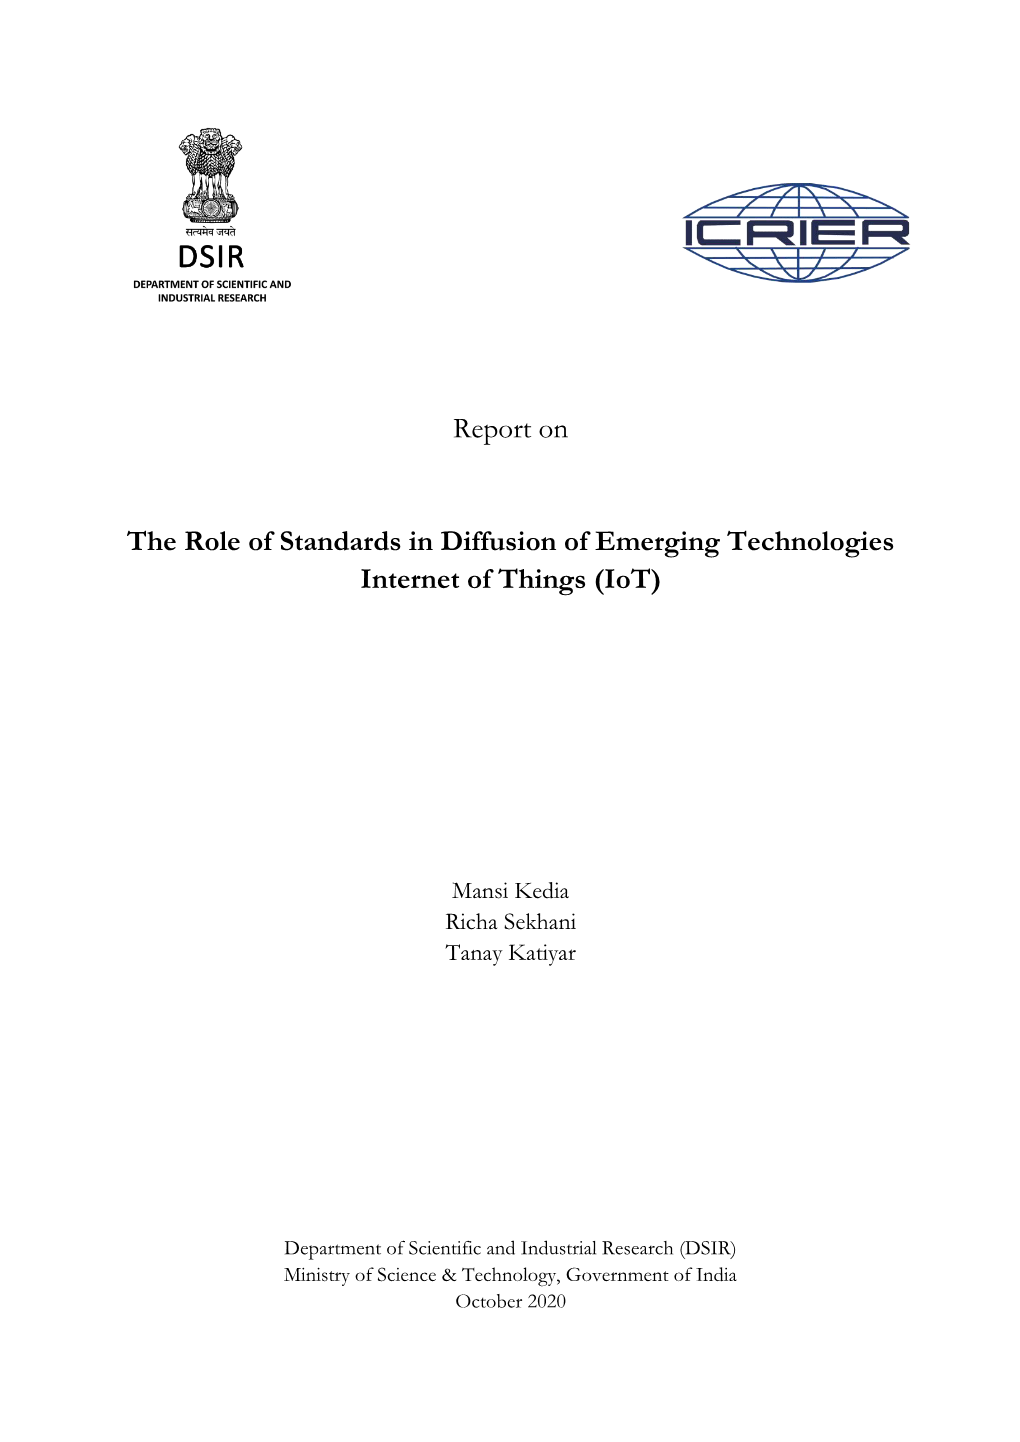 Report on the Role of Standards in Diffusion of Emerging Technologies